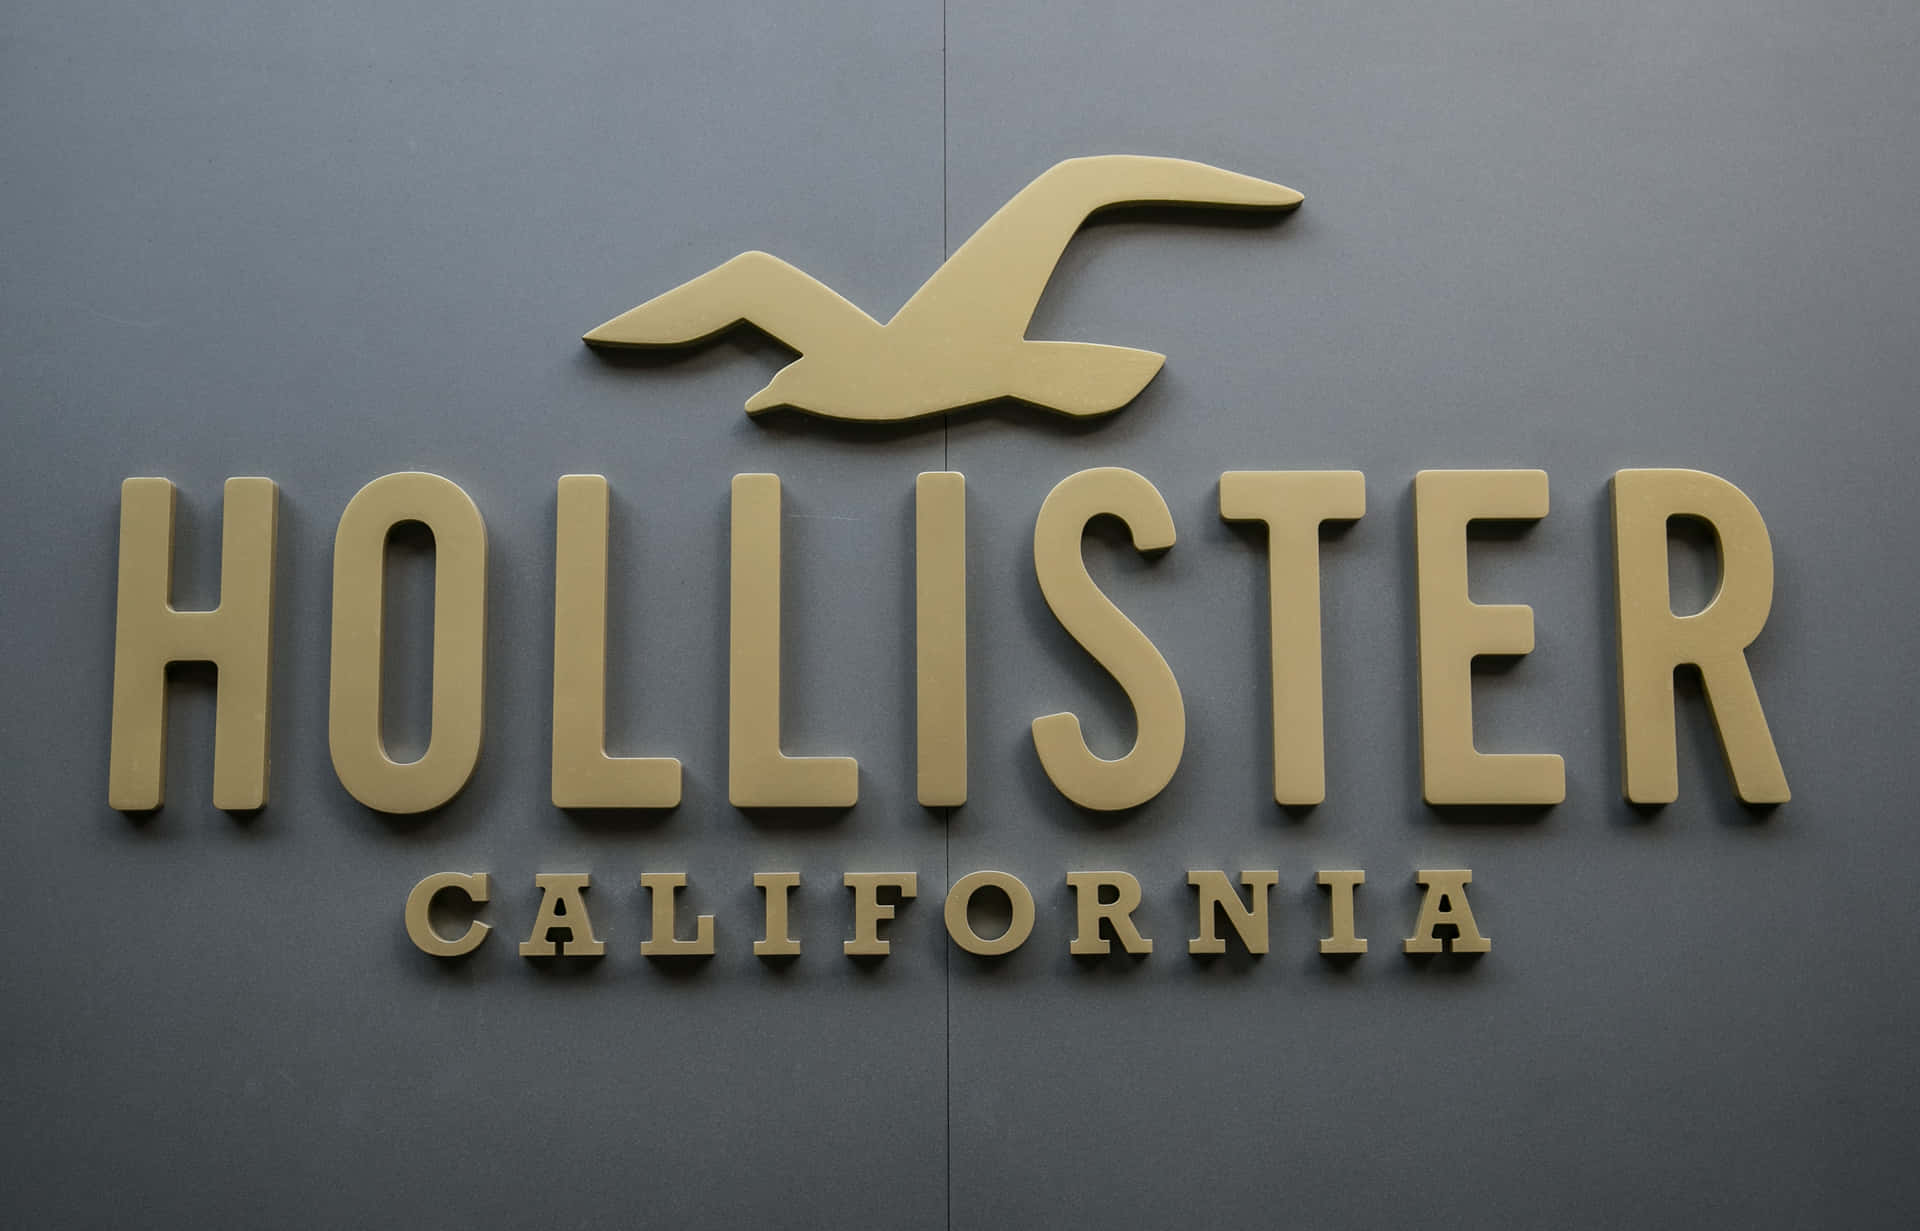 Experience the excitement of coastal-inspired Californian fashion with Hollister